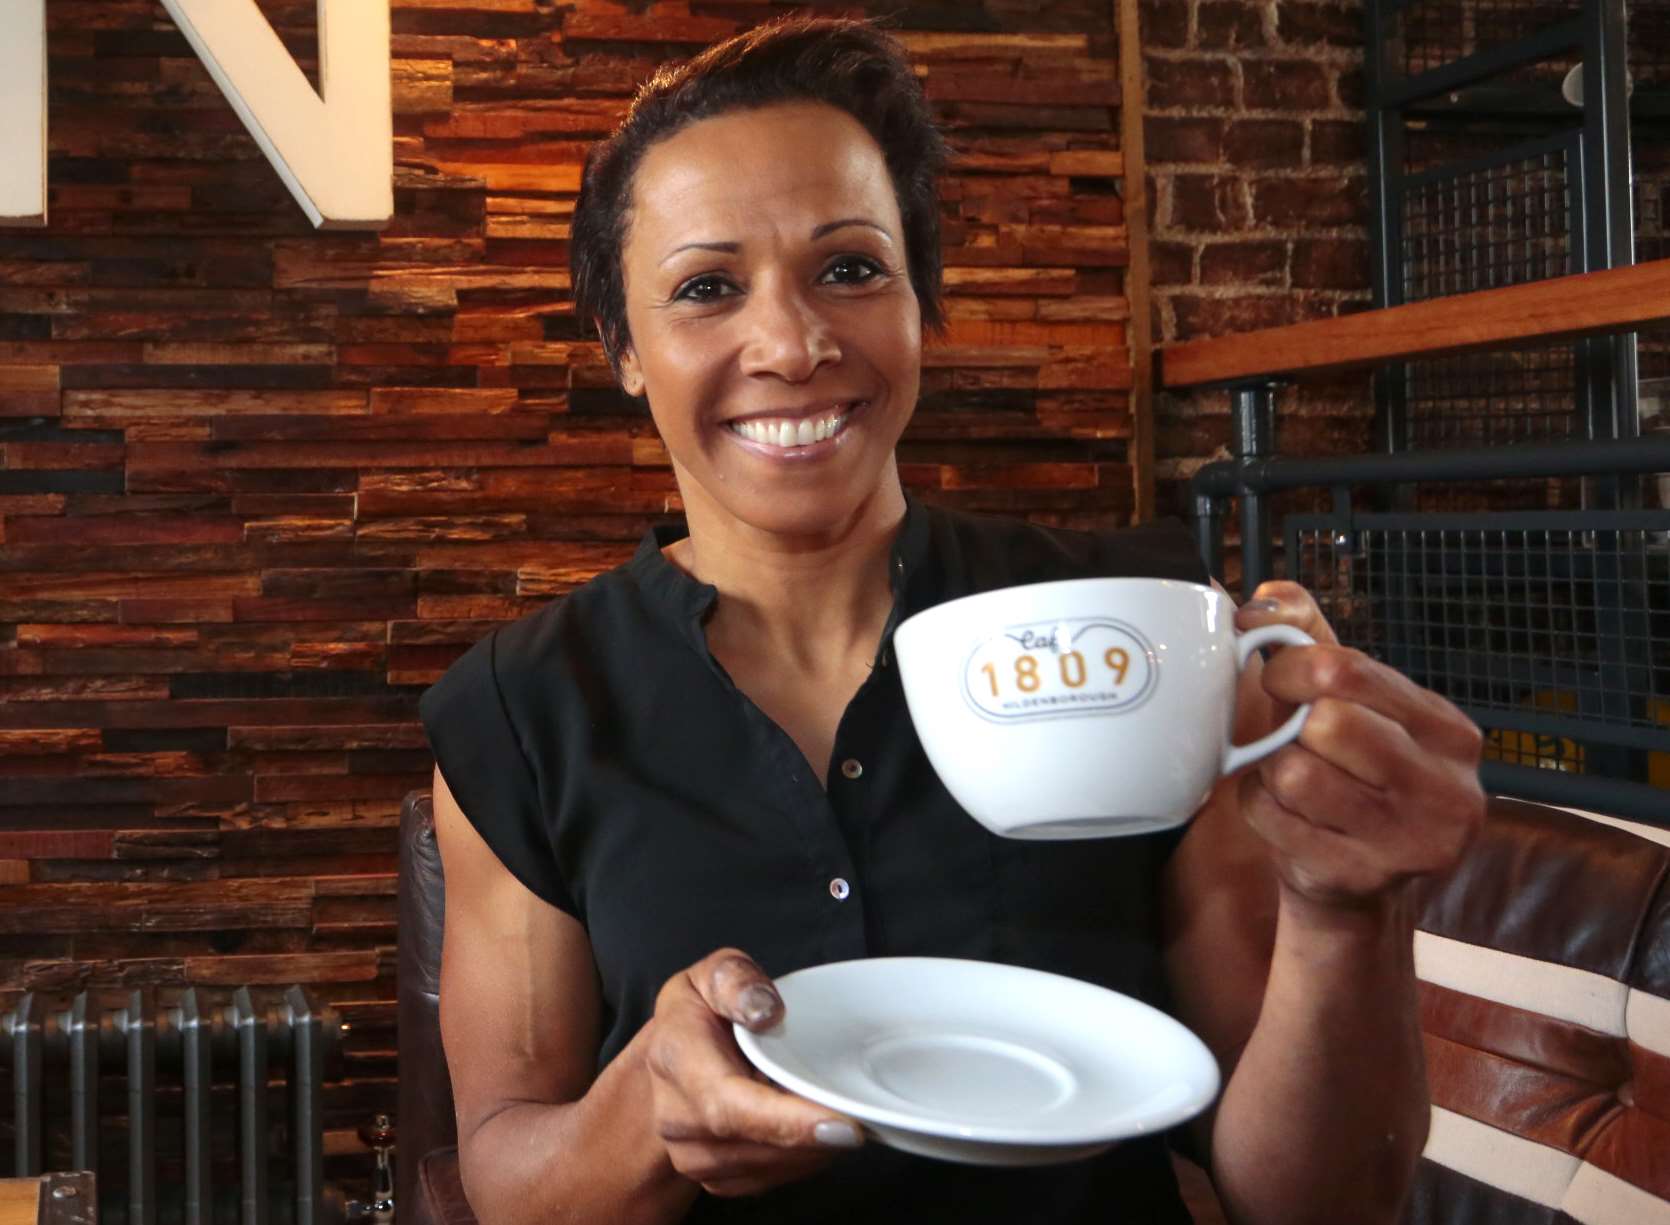 Dame Kelly Holmes at Café 1809 in Hildenborough. Picture: Martin Apps